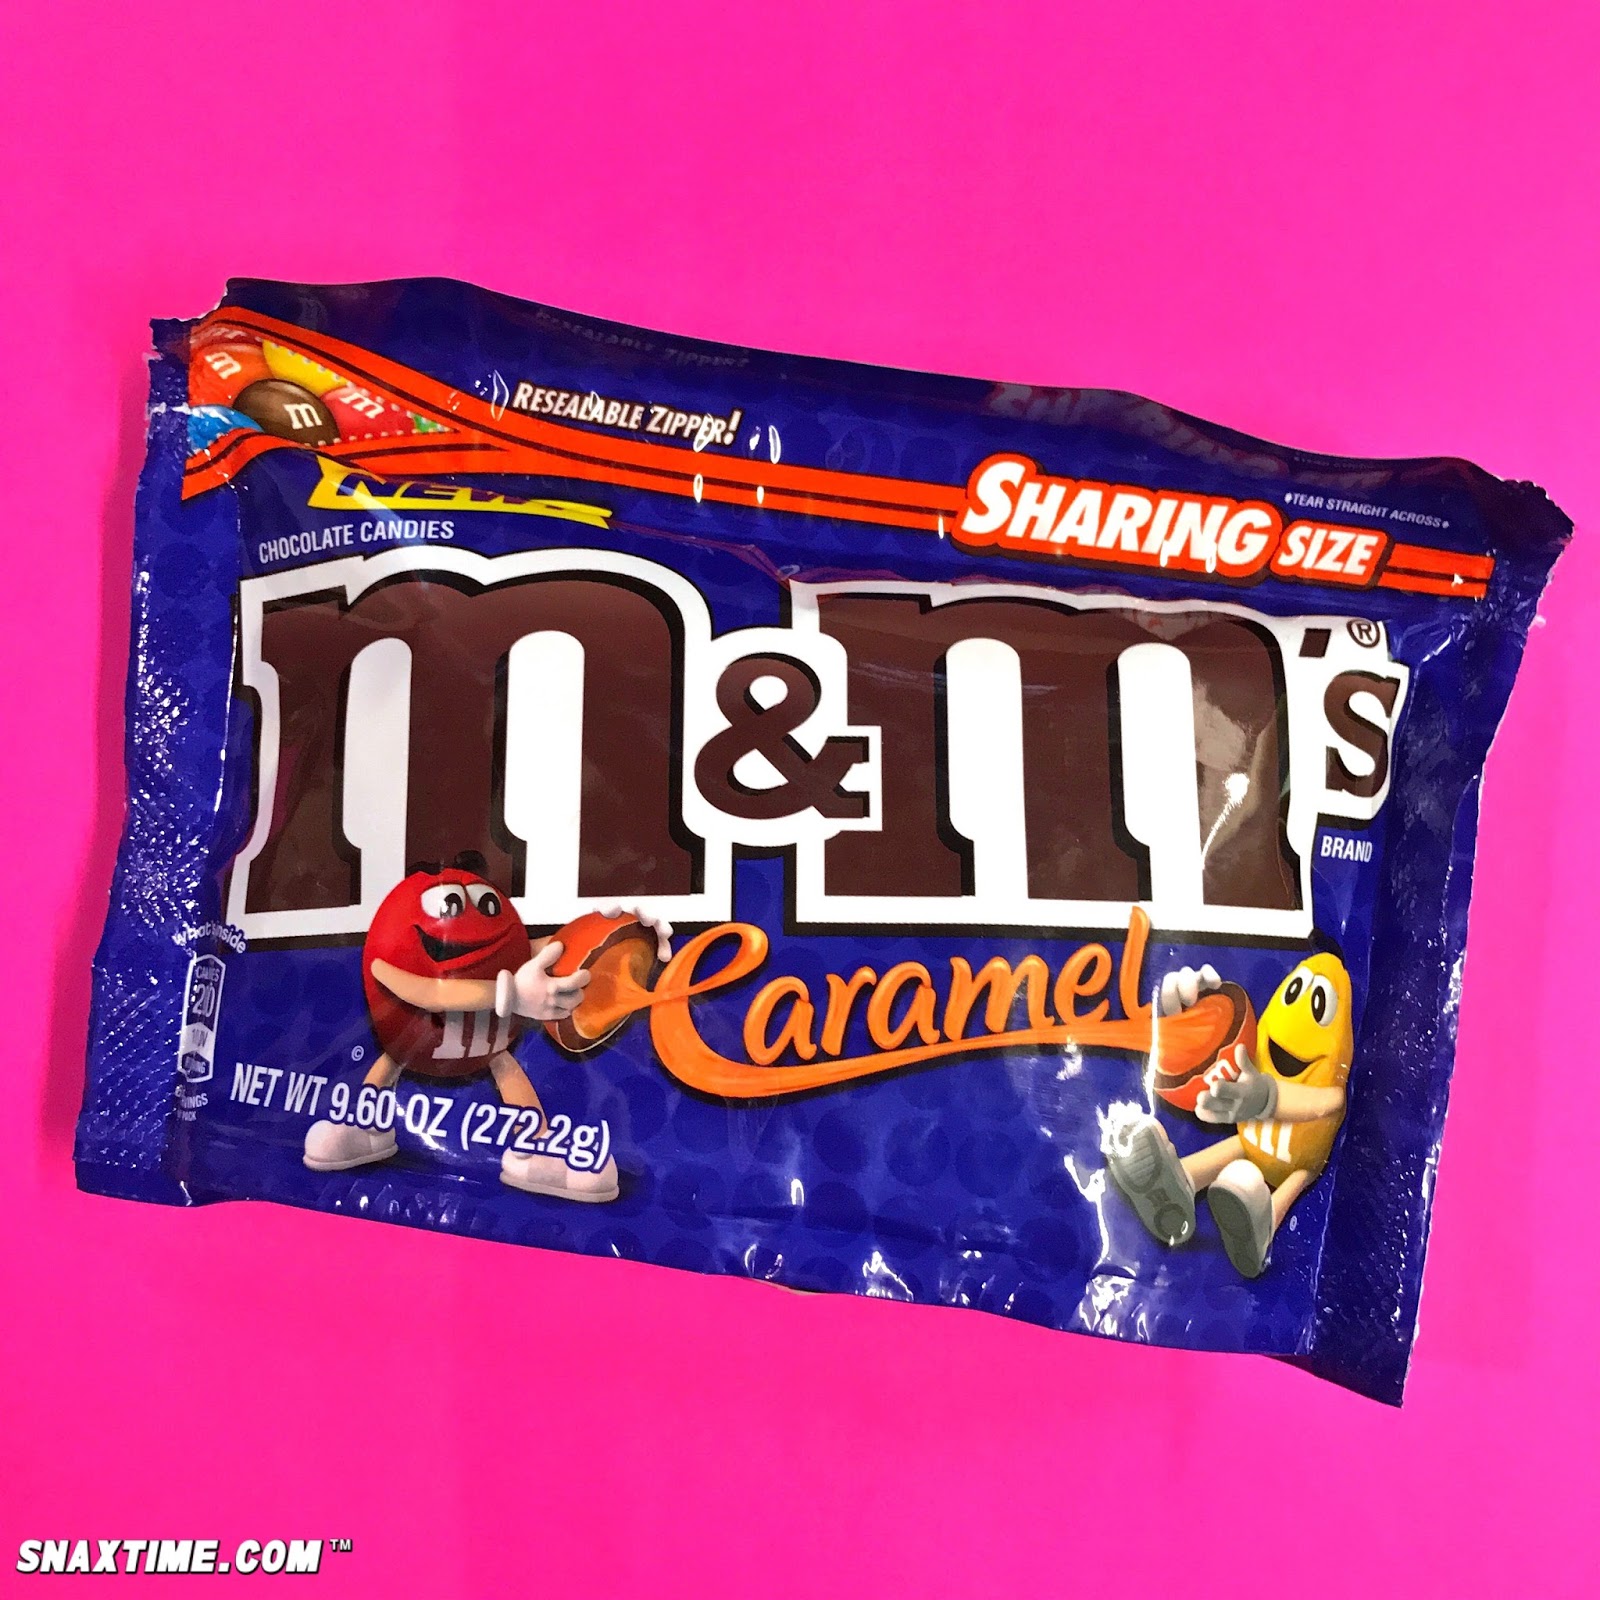 M&M's block quartet and salted caramel flavour debut, Product News